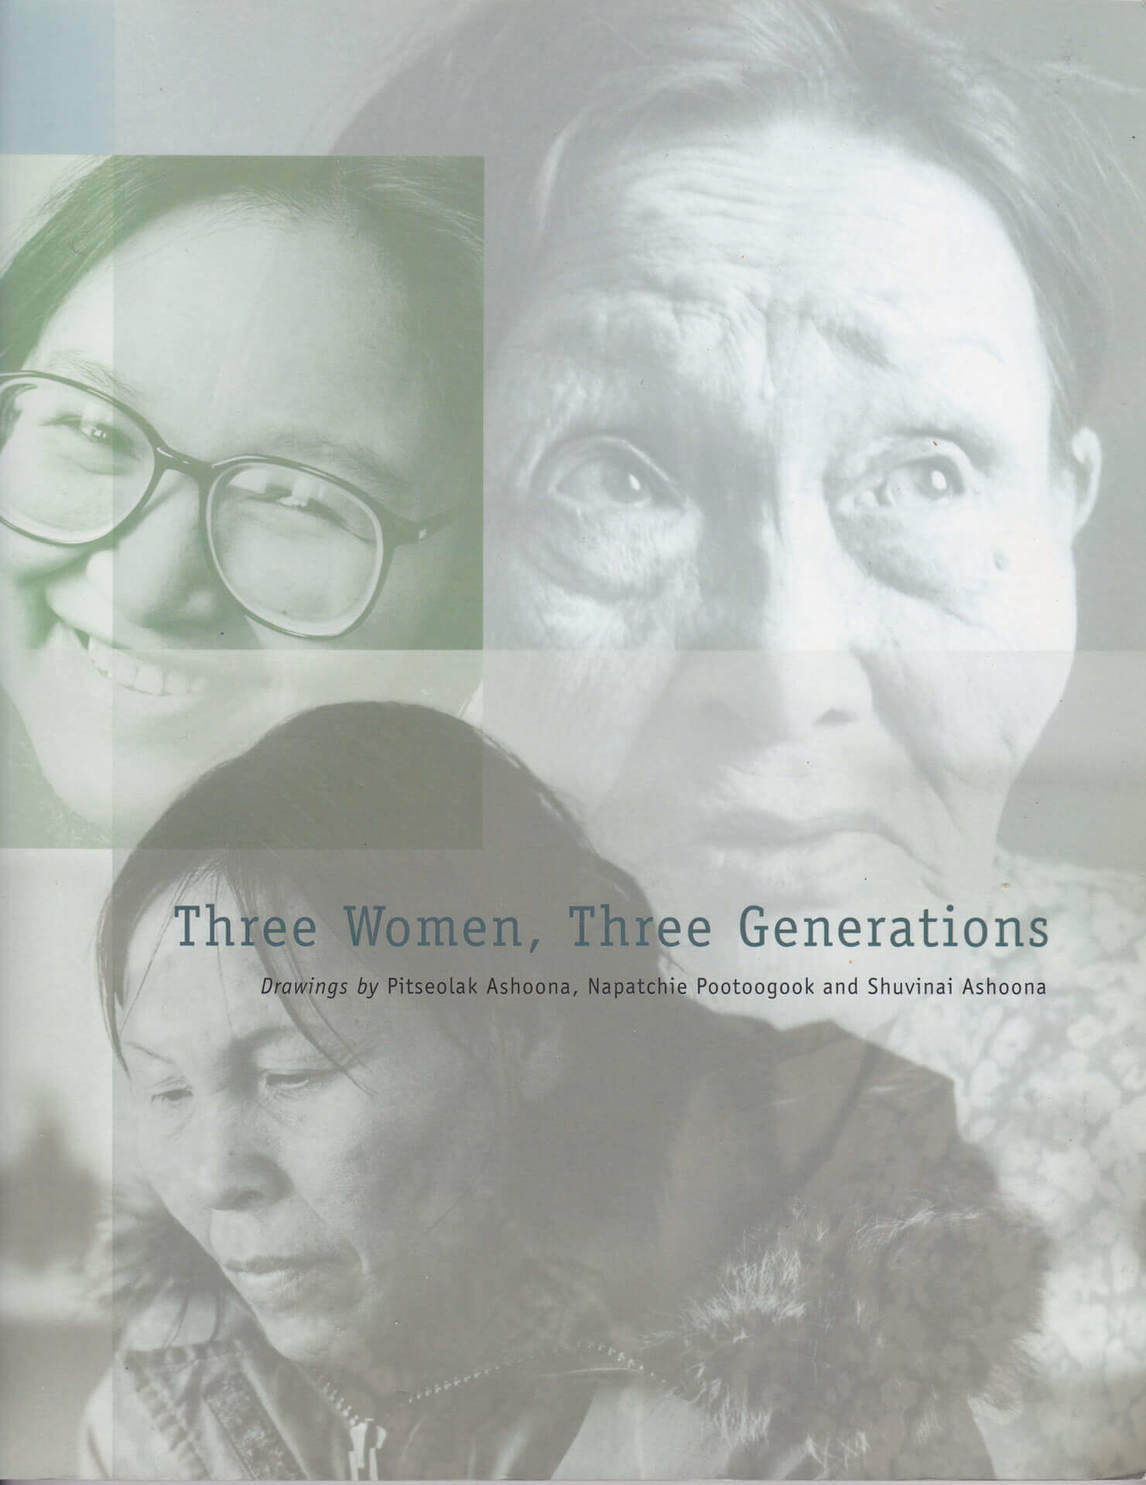 Art Canada Institute, catalogue for the McMichael Canadian Art Collection exhibition Three Women, Three Generations: Drawings by Pitseolak Ashoona, Napatchie Pootoogook and Shuvinai Ashoona, 1999